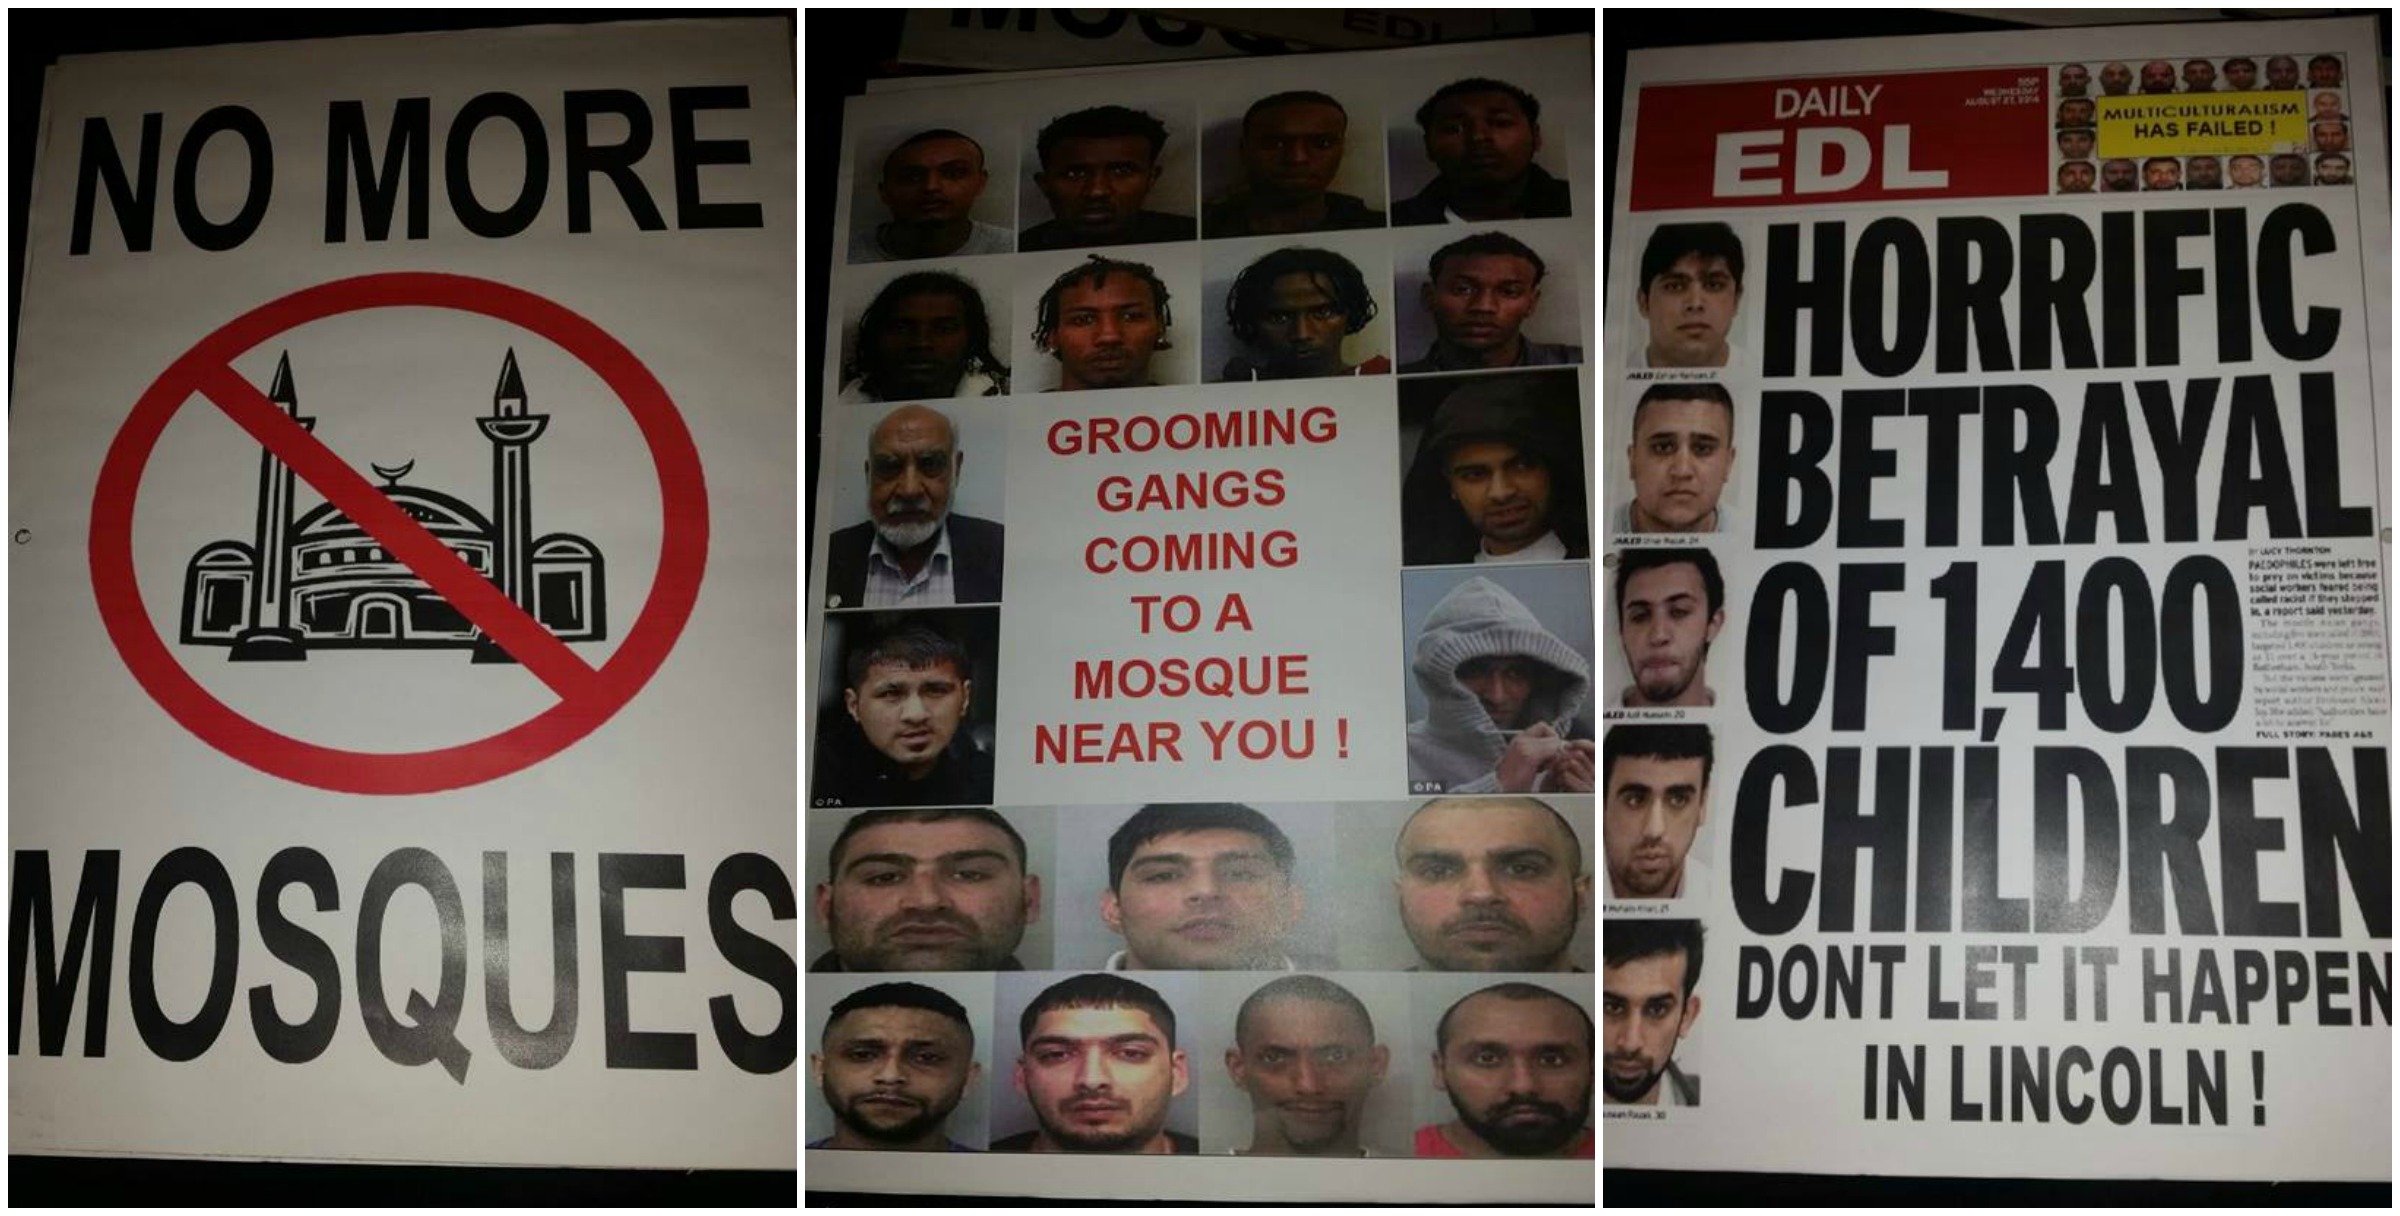 The posters were put up outside the site of the Lincoln Mosque